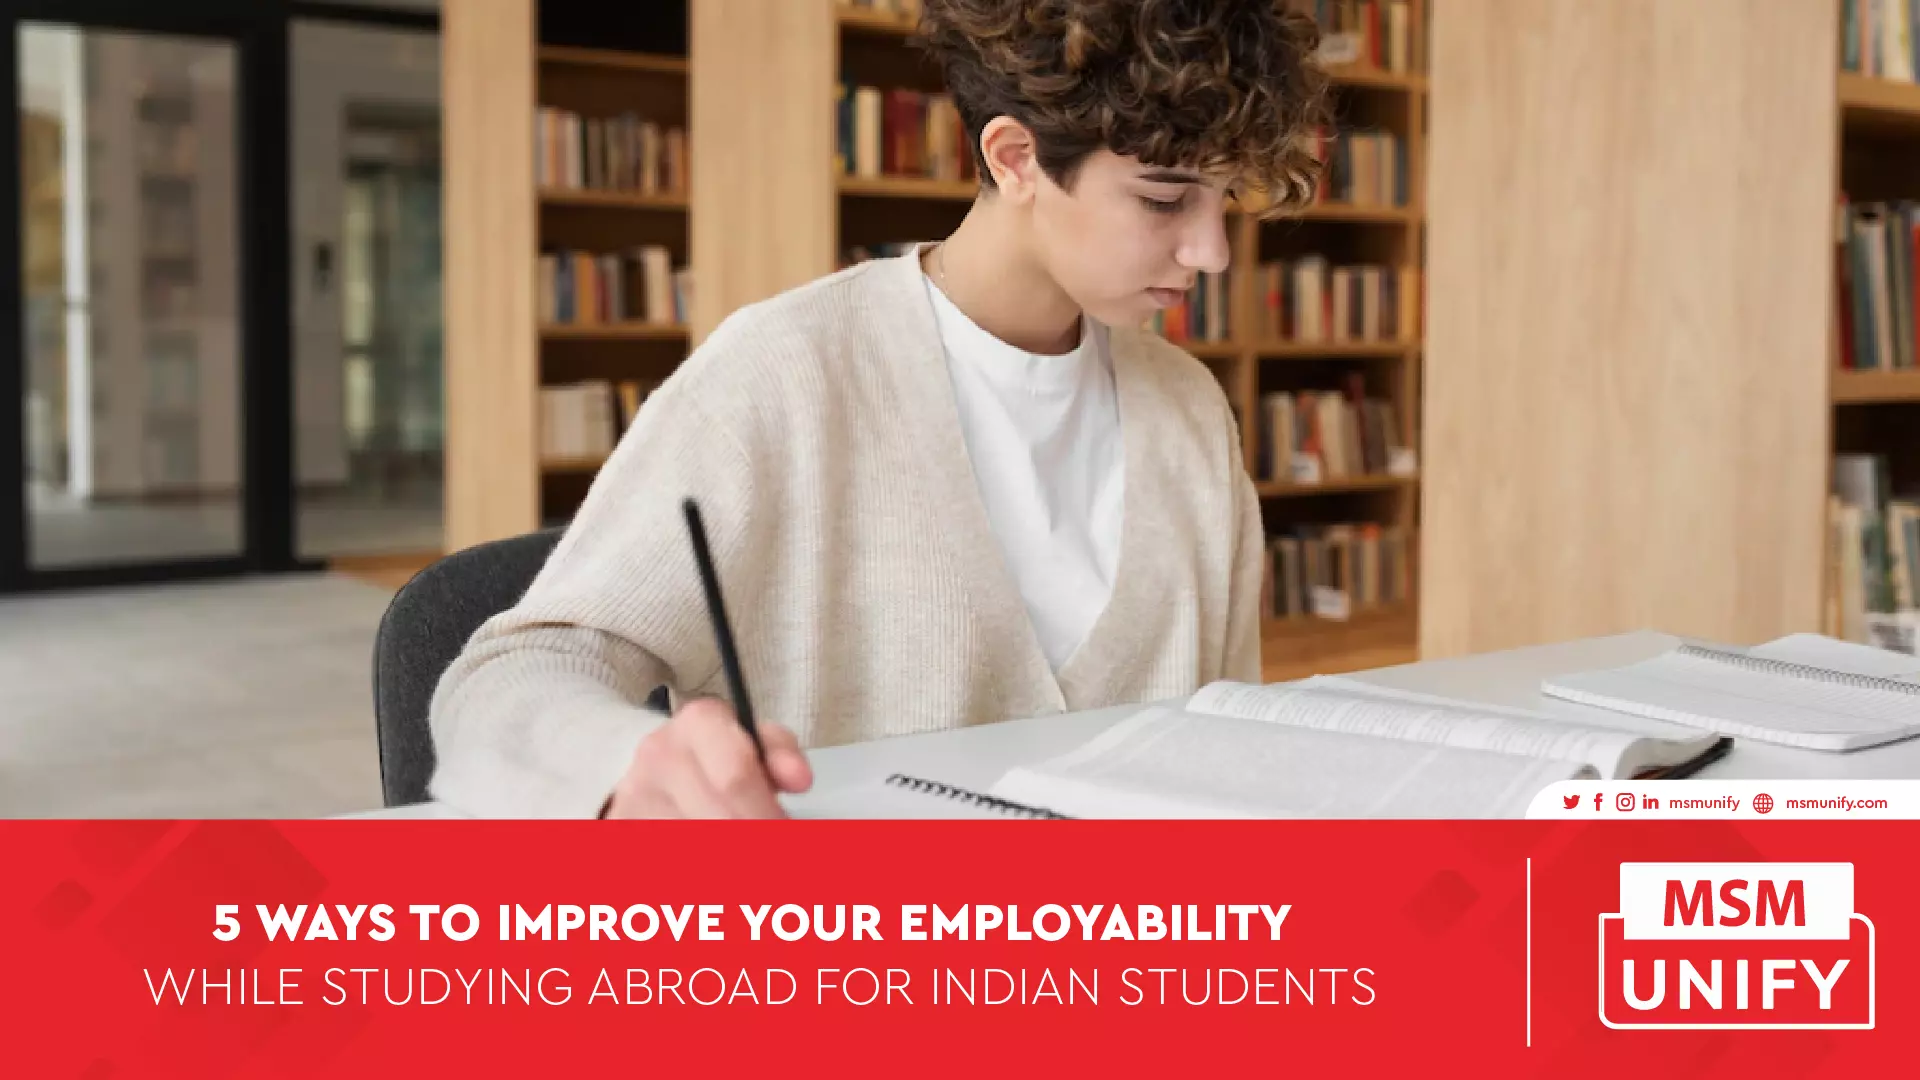 MSM Unify 5 ways to improve your employability while studying abroad for Indian Students